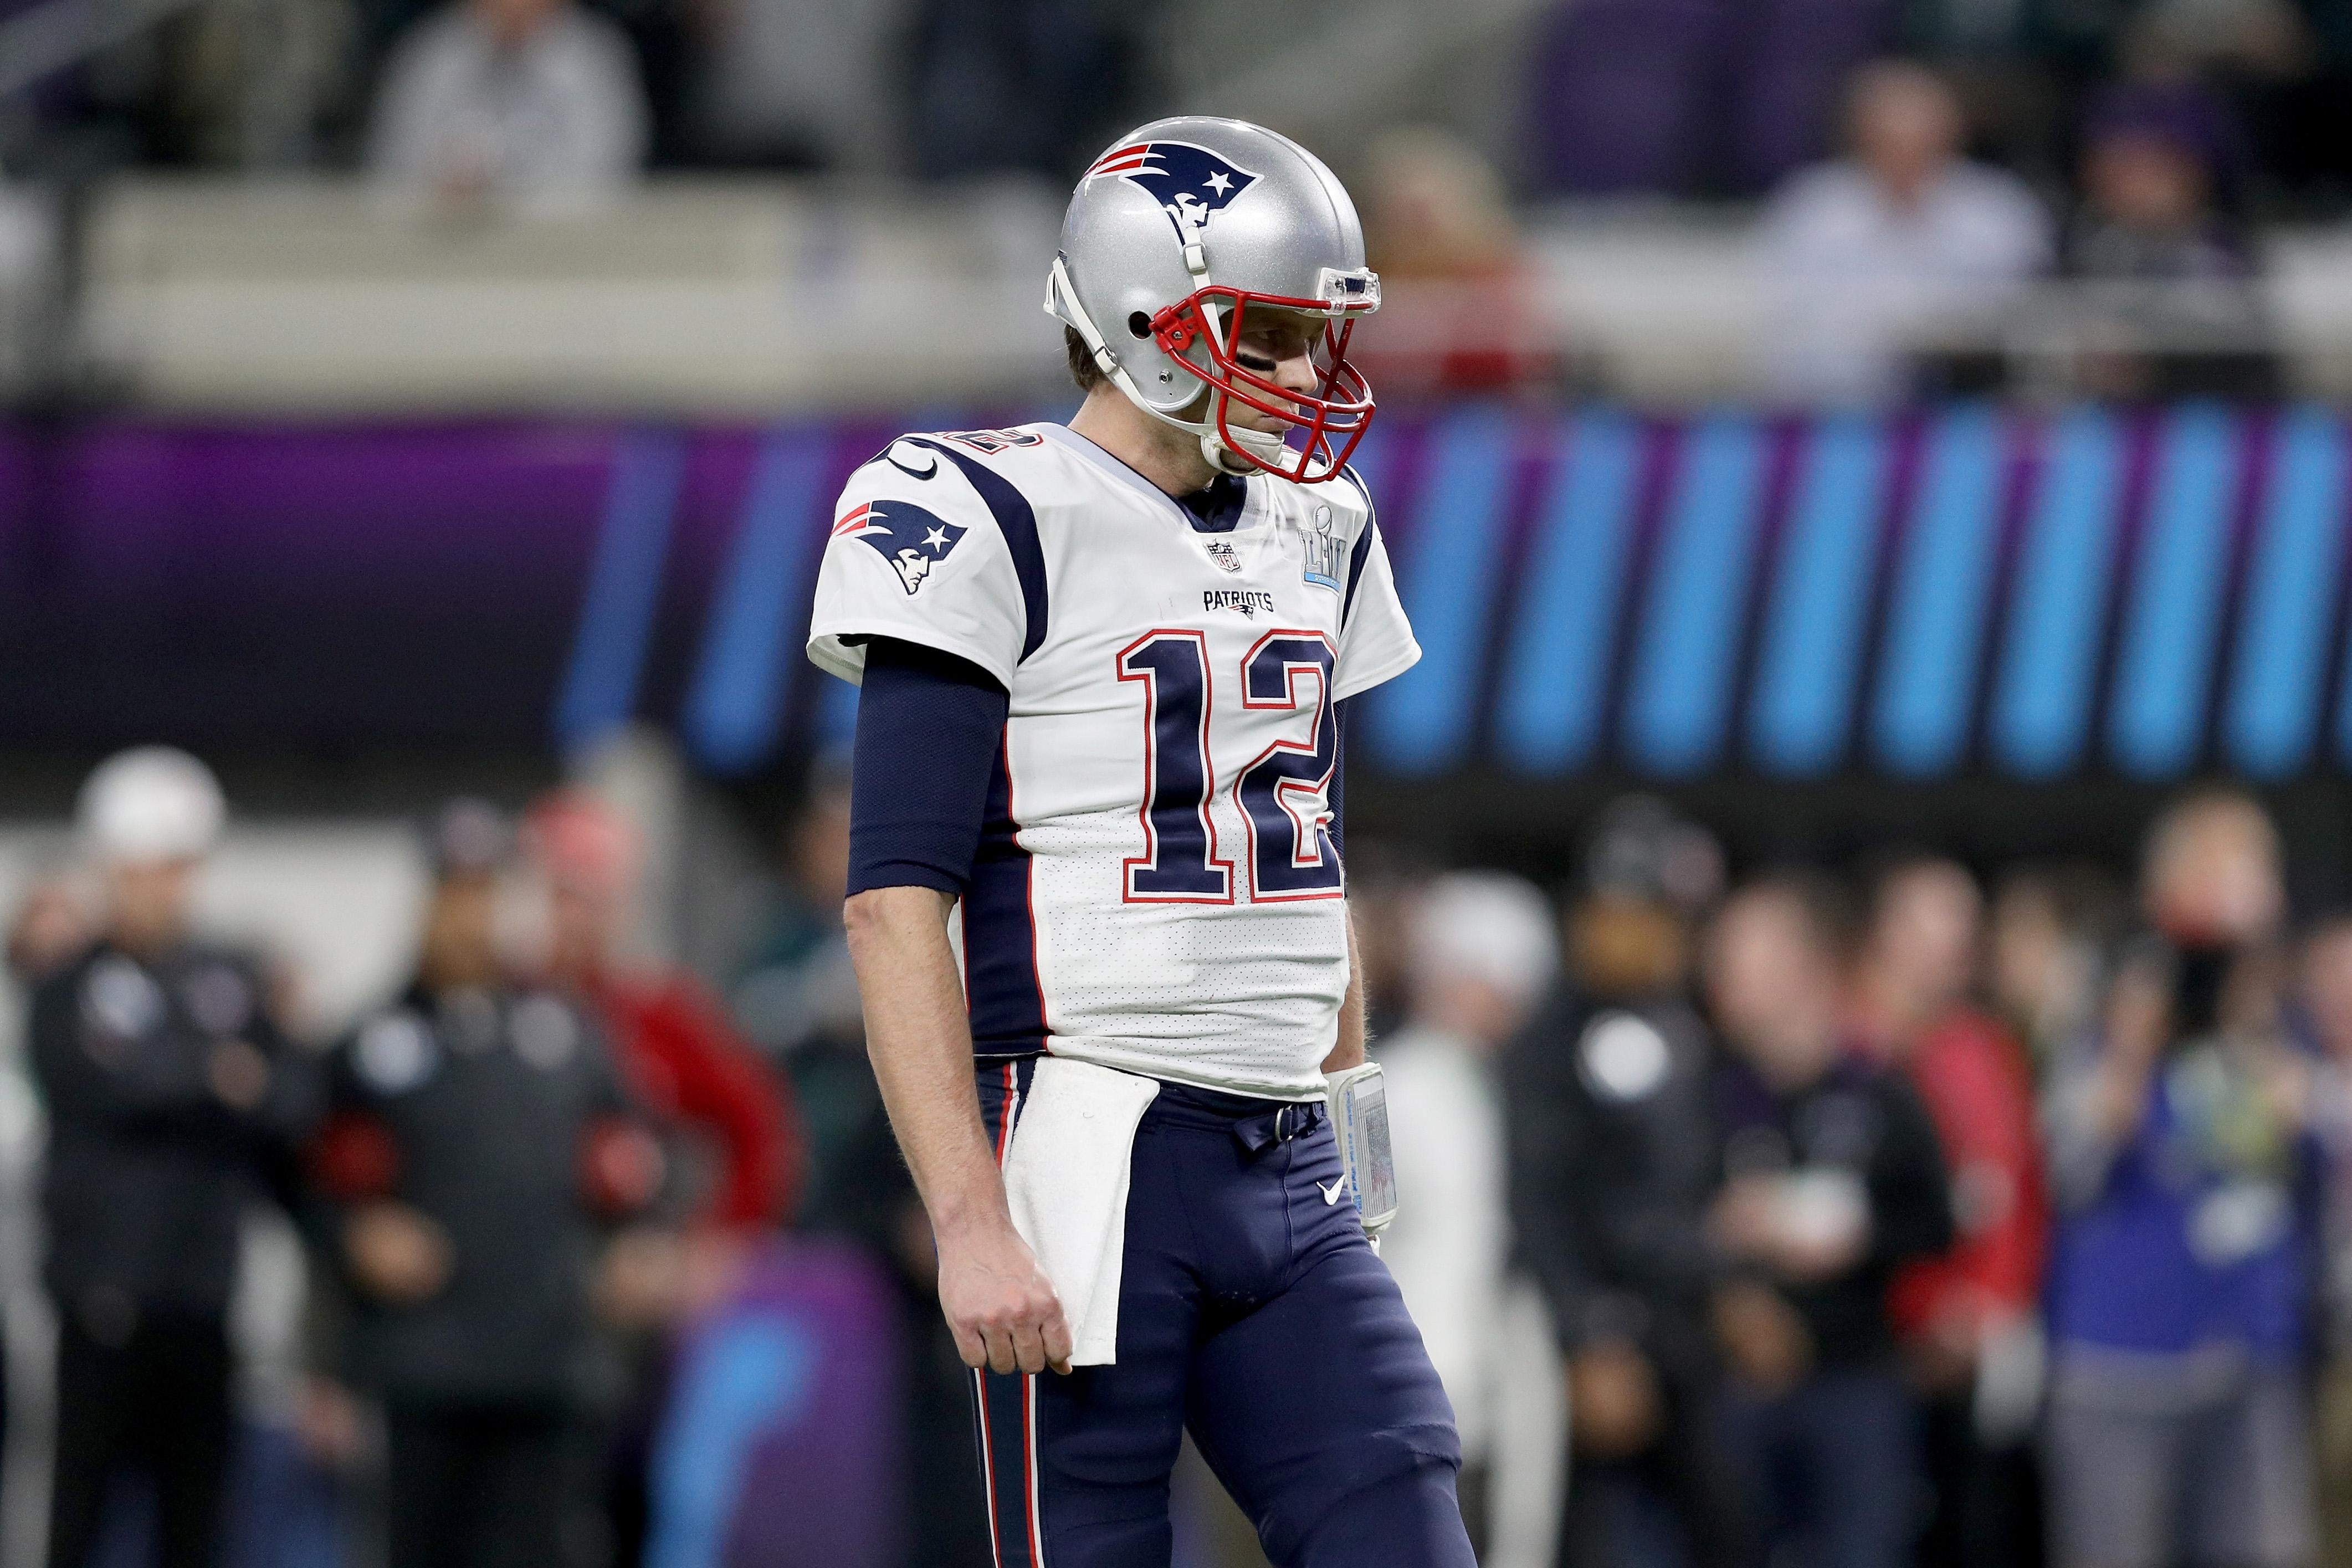 Here are some very satisfying photos of Tom Brady looking sad